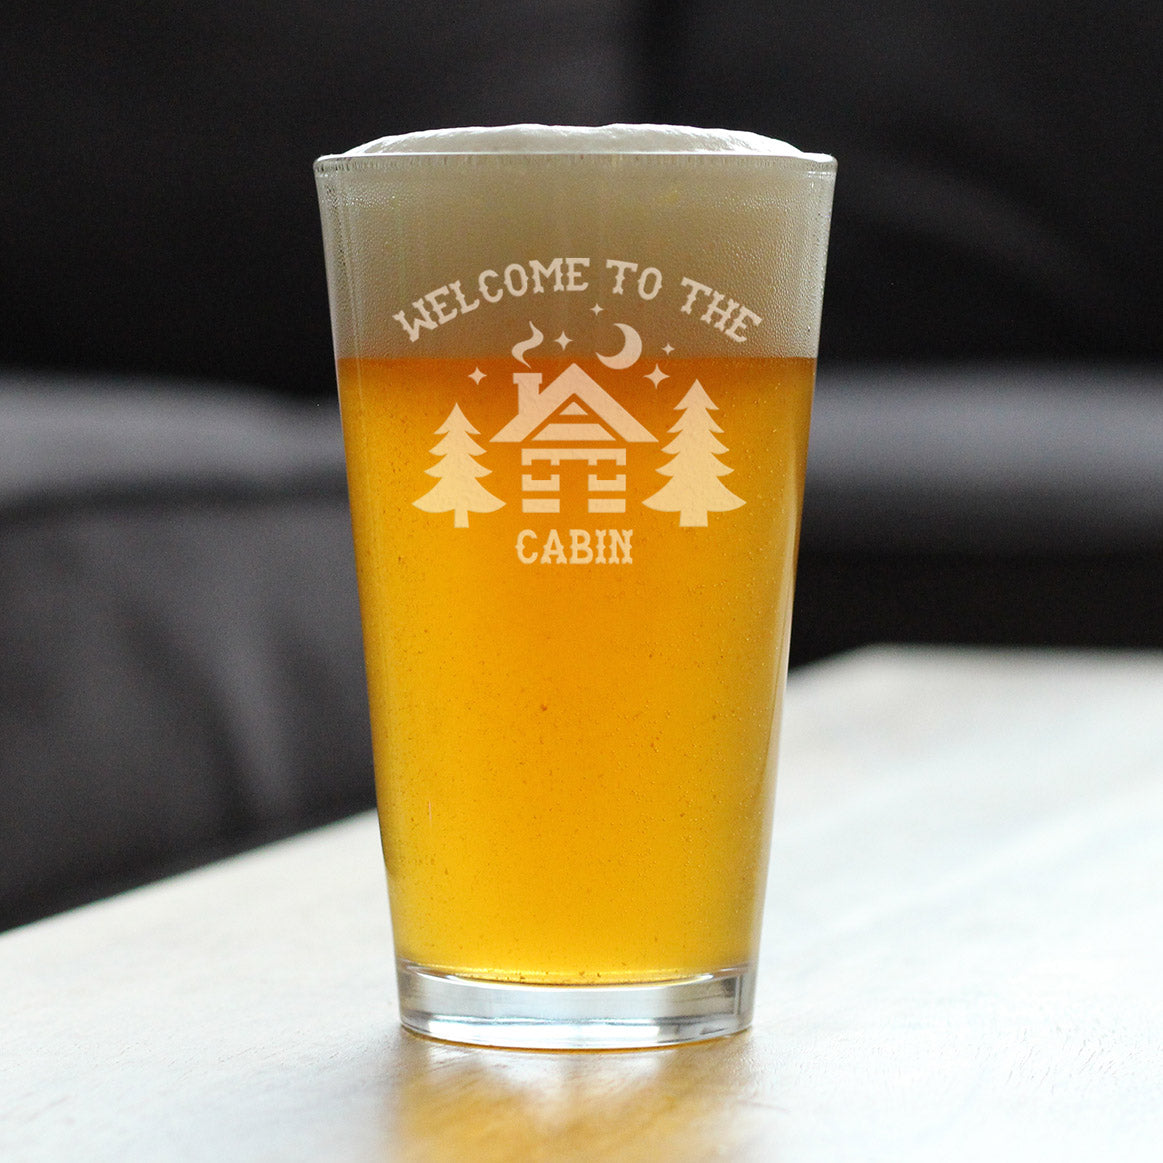 Welcome To The Cabin - Pint Glass for Beer - Rustic Themed Gifts and Cabin Decor Large - 16 Oz Glasses